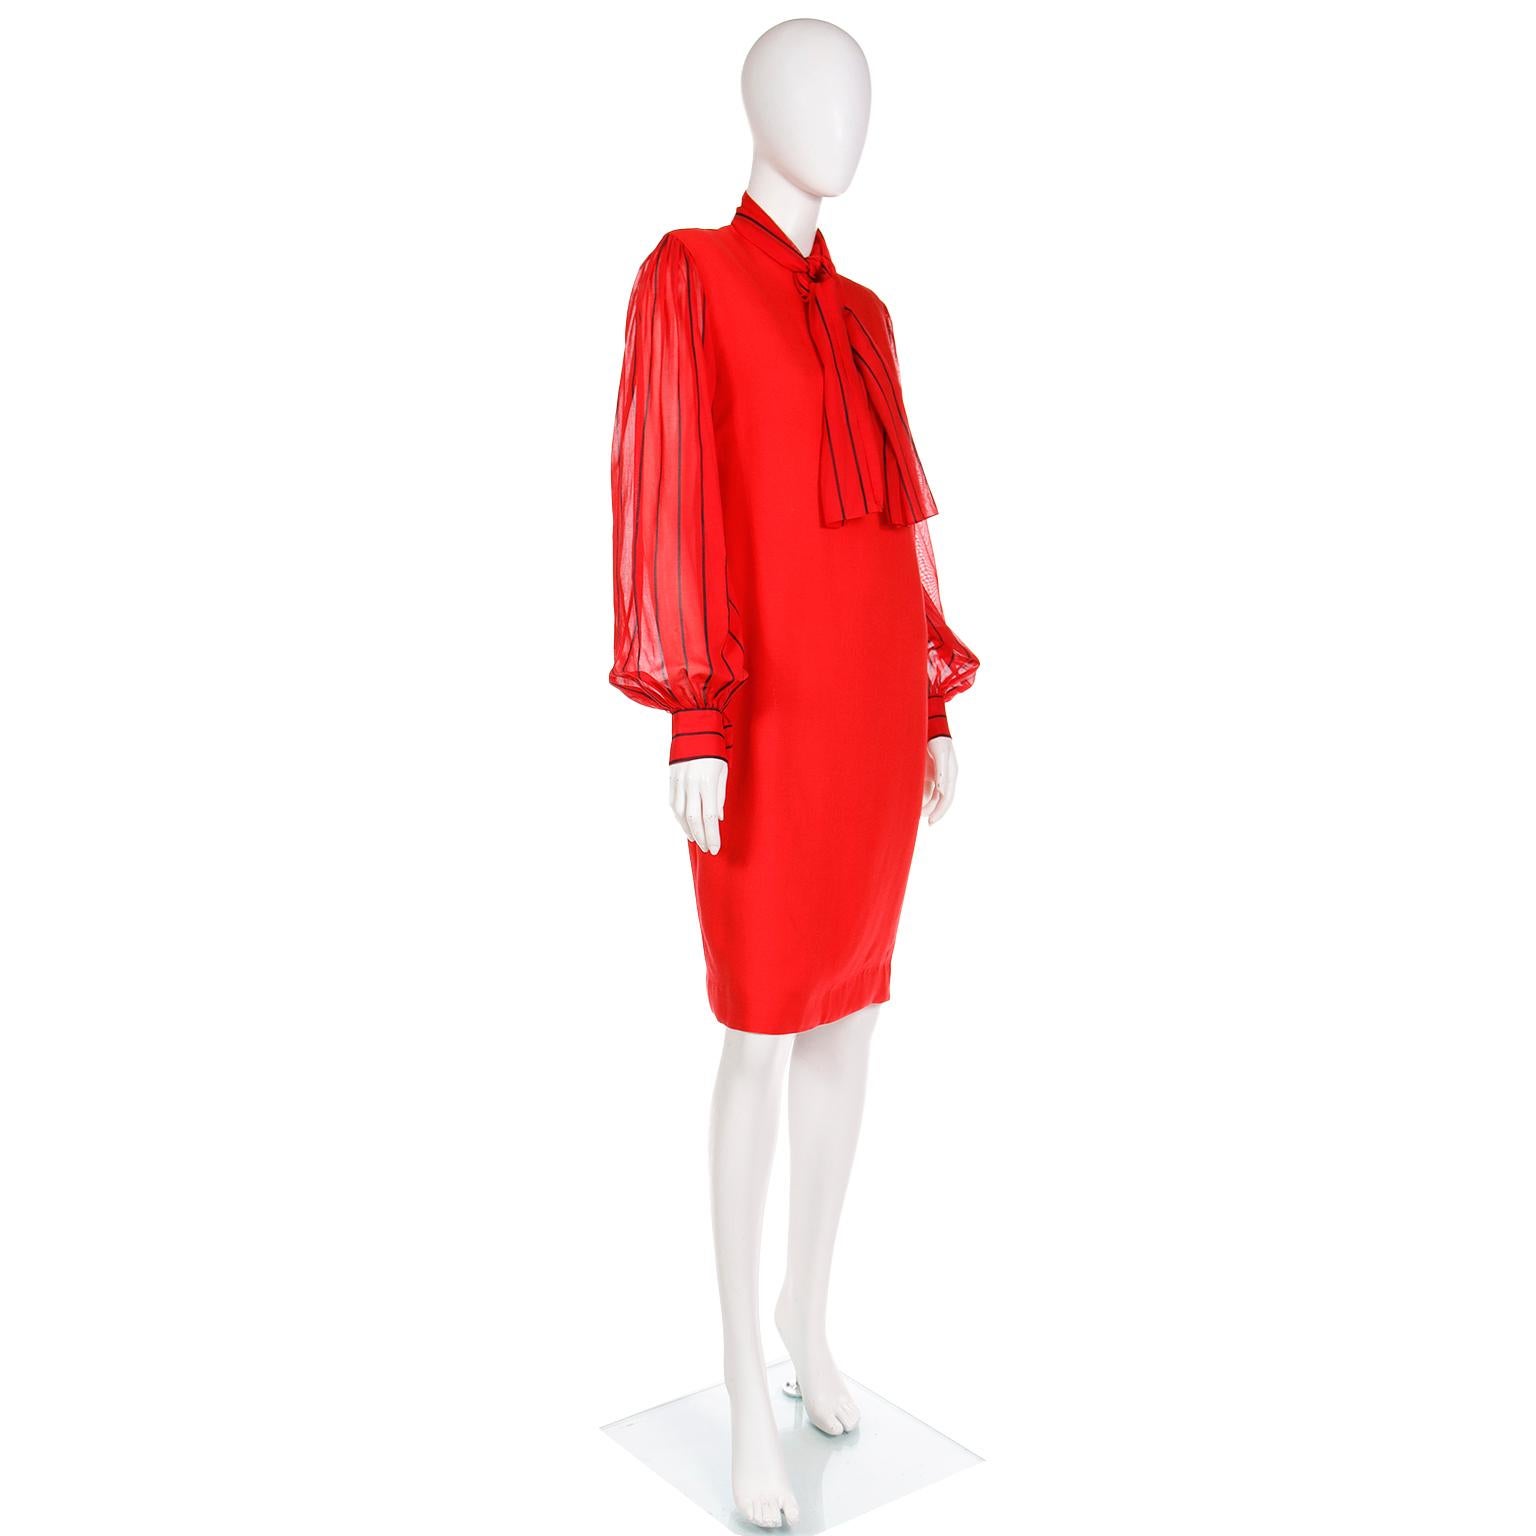 Women's Pauline Trigere Vintage Red Dress With Sheer Striped Sleeves & Scarf For Sale